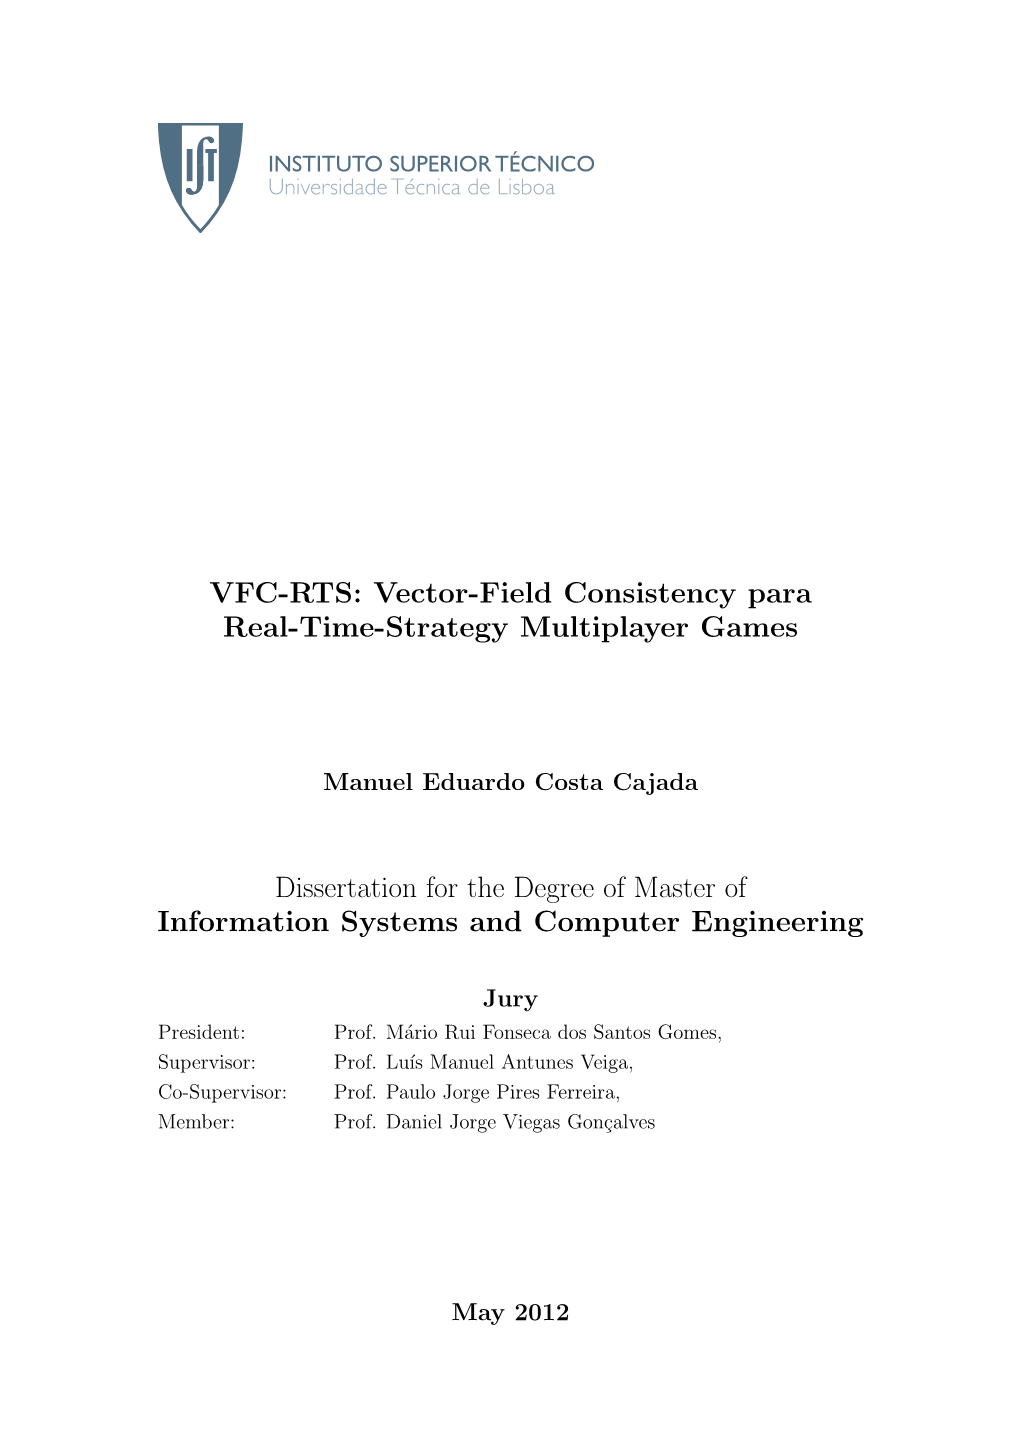 VFC-RTS: Vector-Field Consistency Para Real-Time-Strategy Multiplayer Games